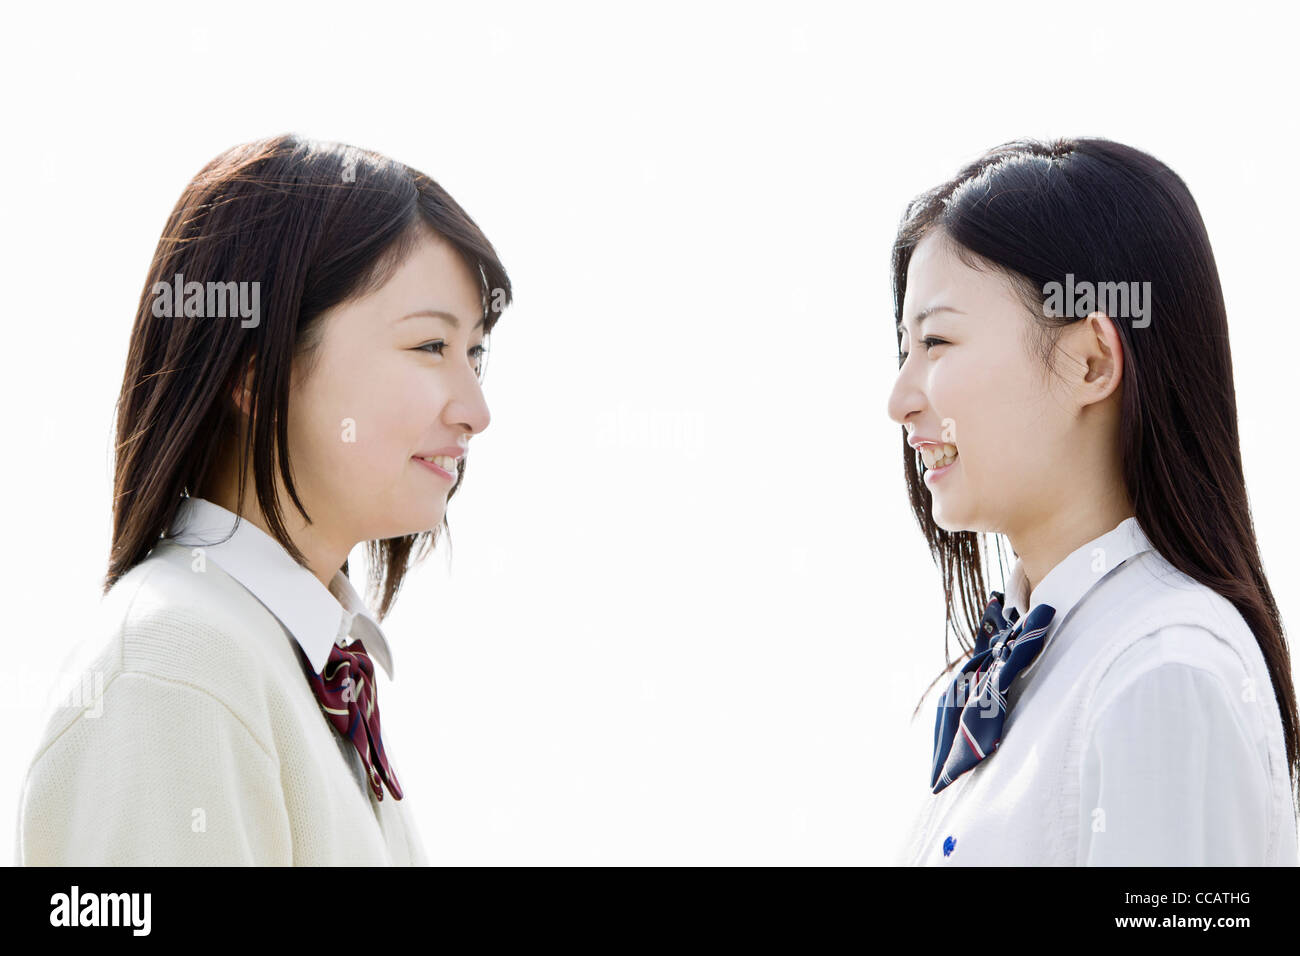 Two high school girls looking at each other Stock Photo